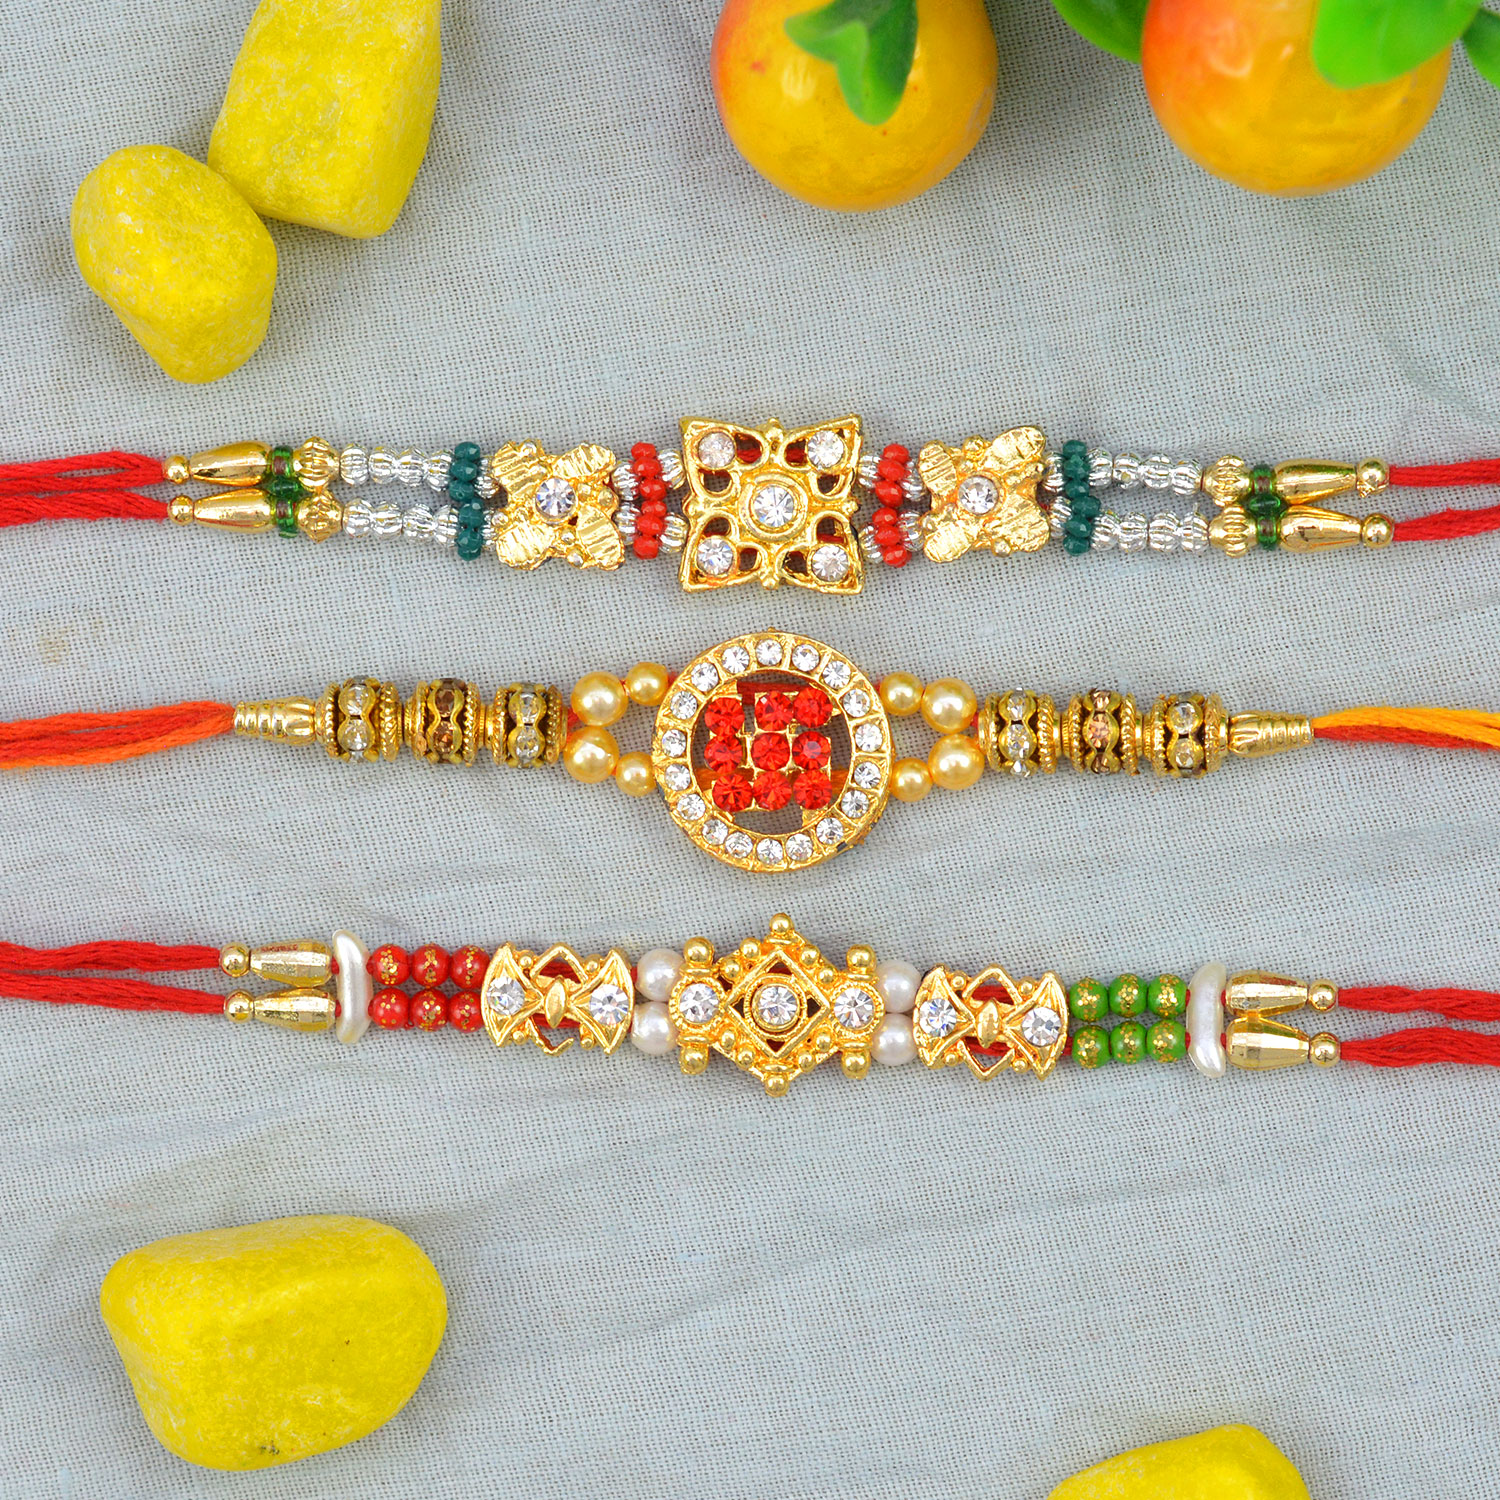 Colorful Beaded and Marvelous Jewel Studded Brother Rakhis Set of 3